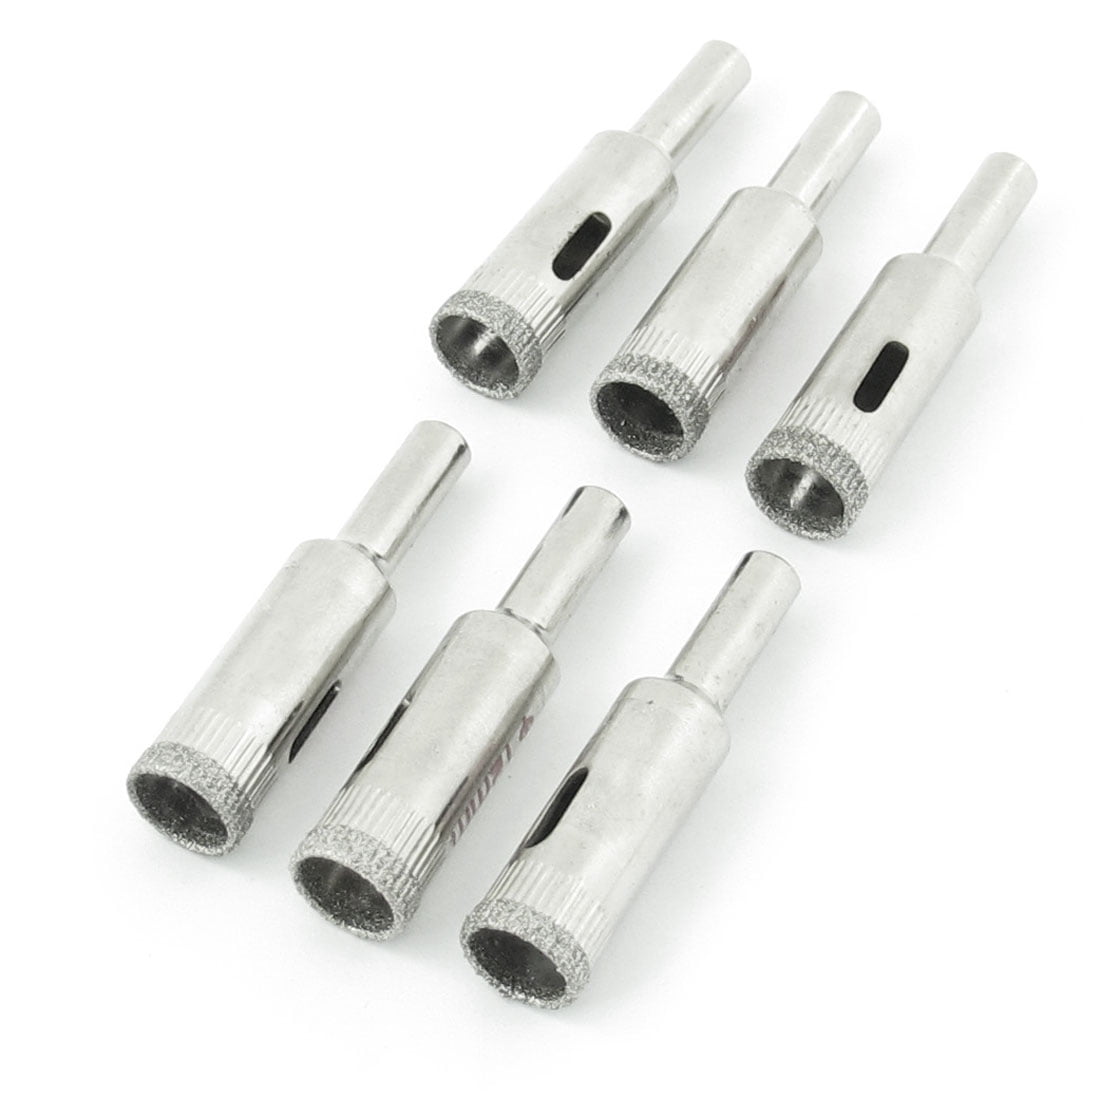 Rummyluck Dry Cut Diamond Drill Bits 6mm Brazed Wax Cooled Drilling Bit Hole Opener Tool for Ceramic Tiles Stone Marble Glass Granite